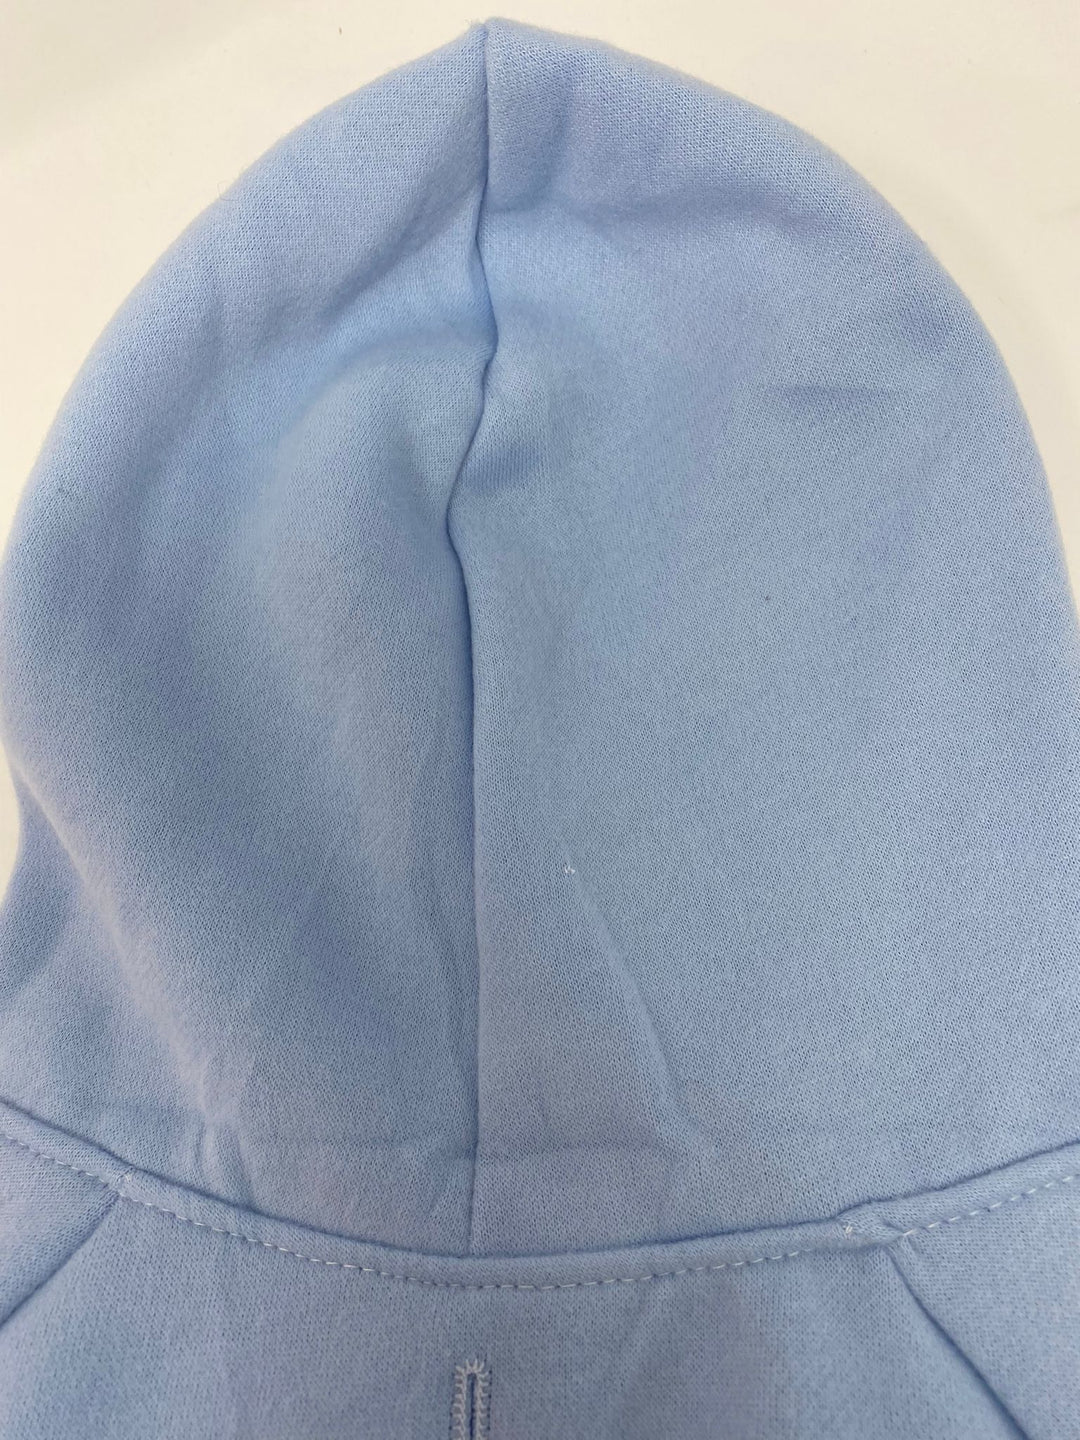 Outlet - XL DOG HOODIE -NO POPPERS- SKY BLUE - 0080